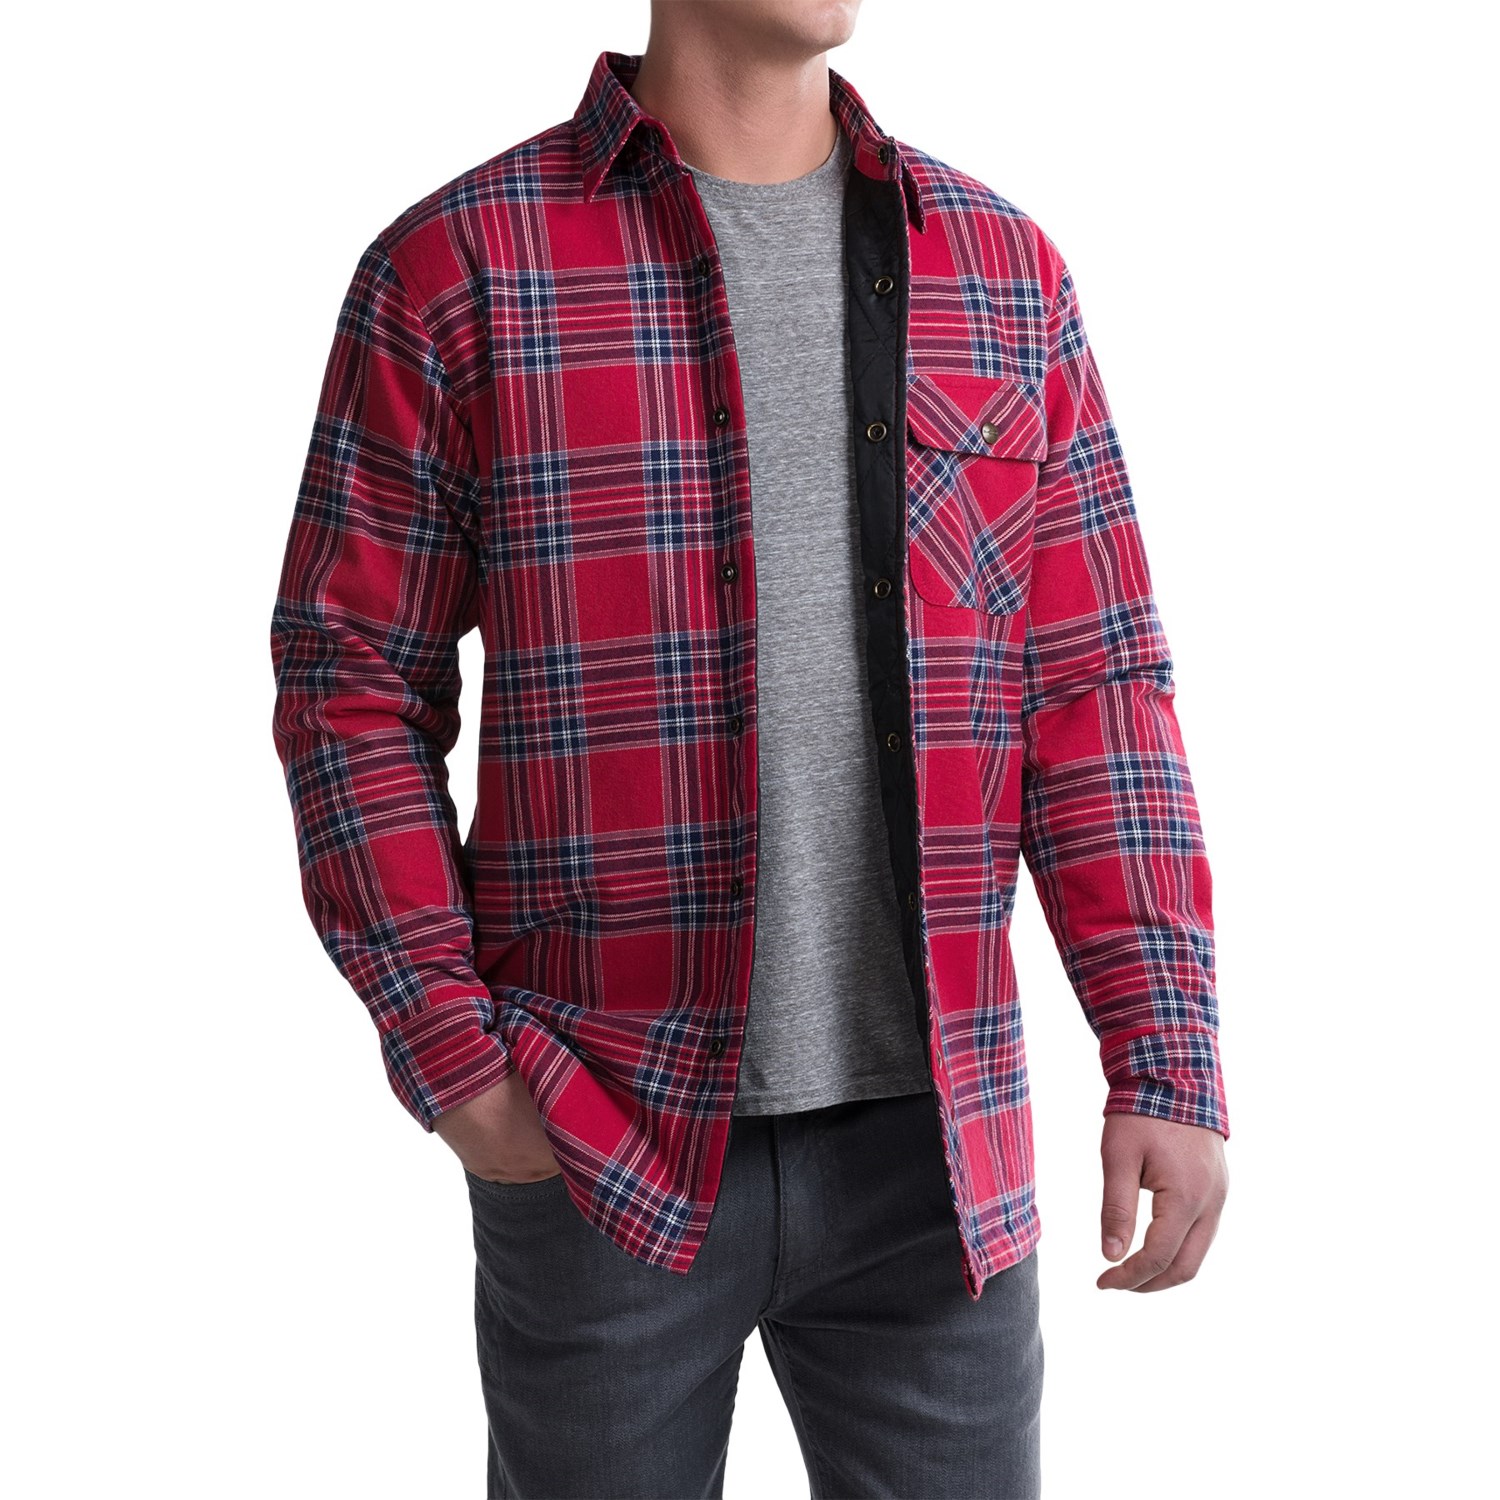 Backpacker Quilted Flannel Shirt Jacket (For Men) - Save 33%